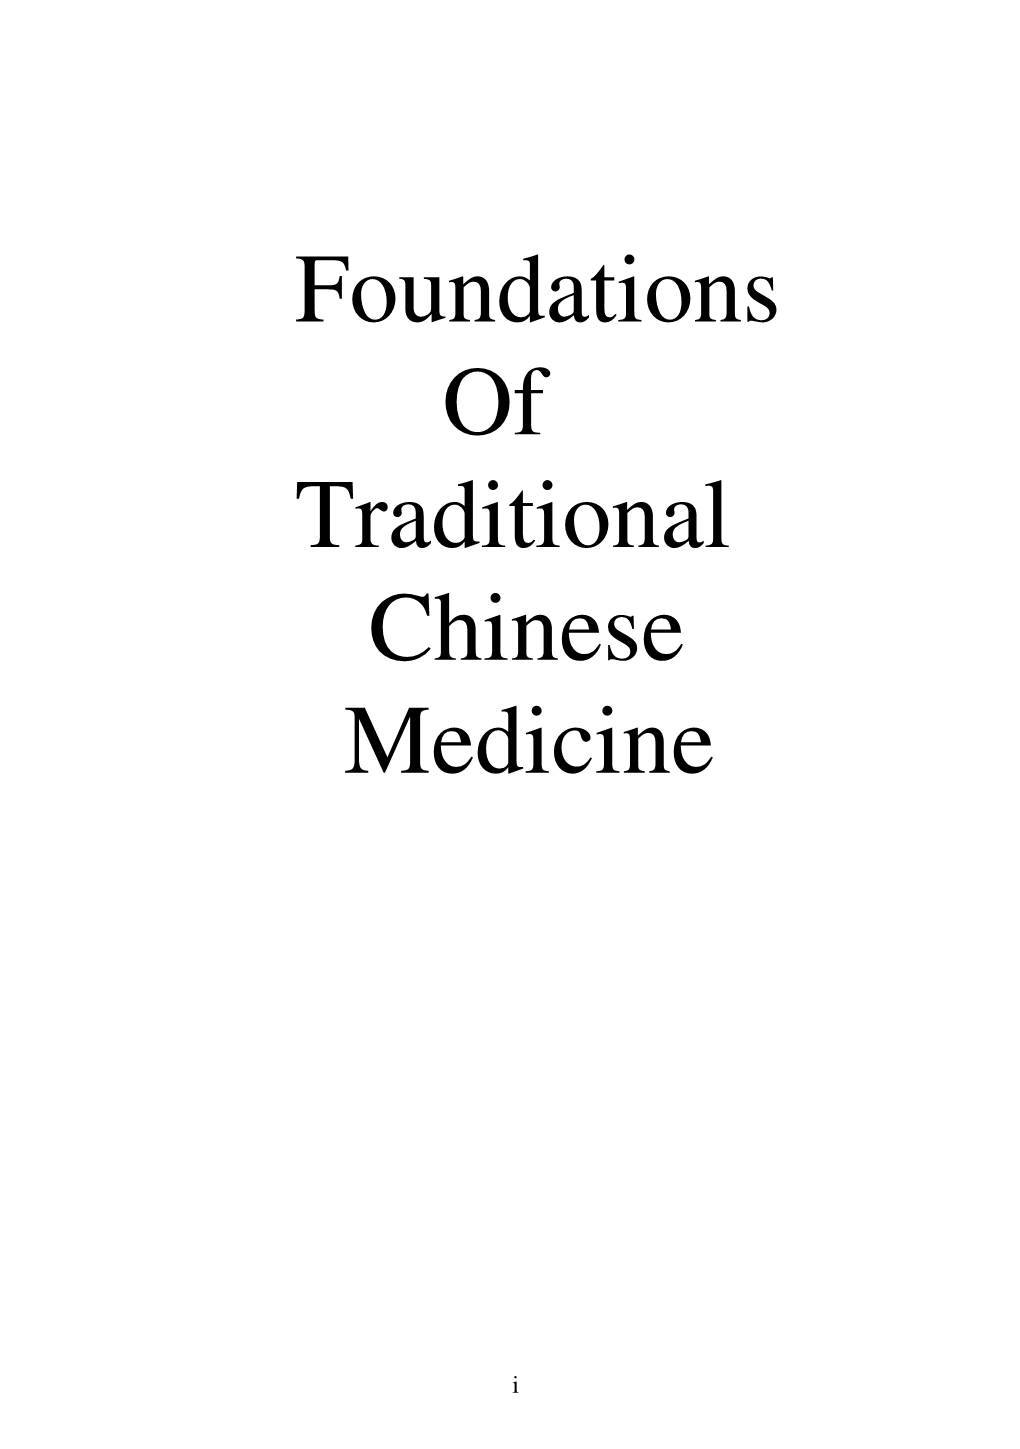 Foundations of Traditional Chinese Medicine